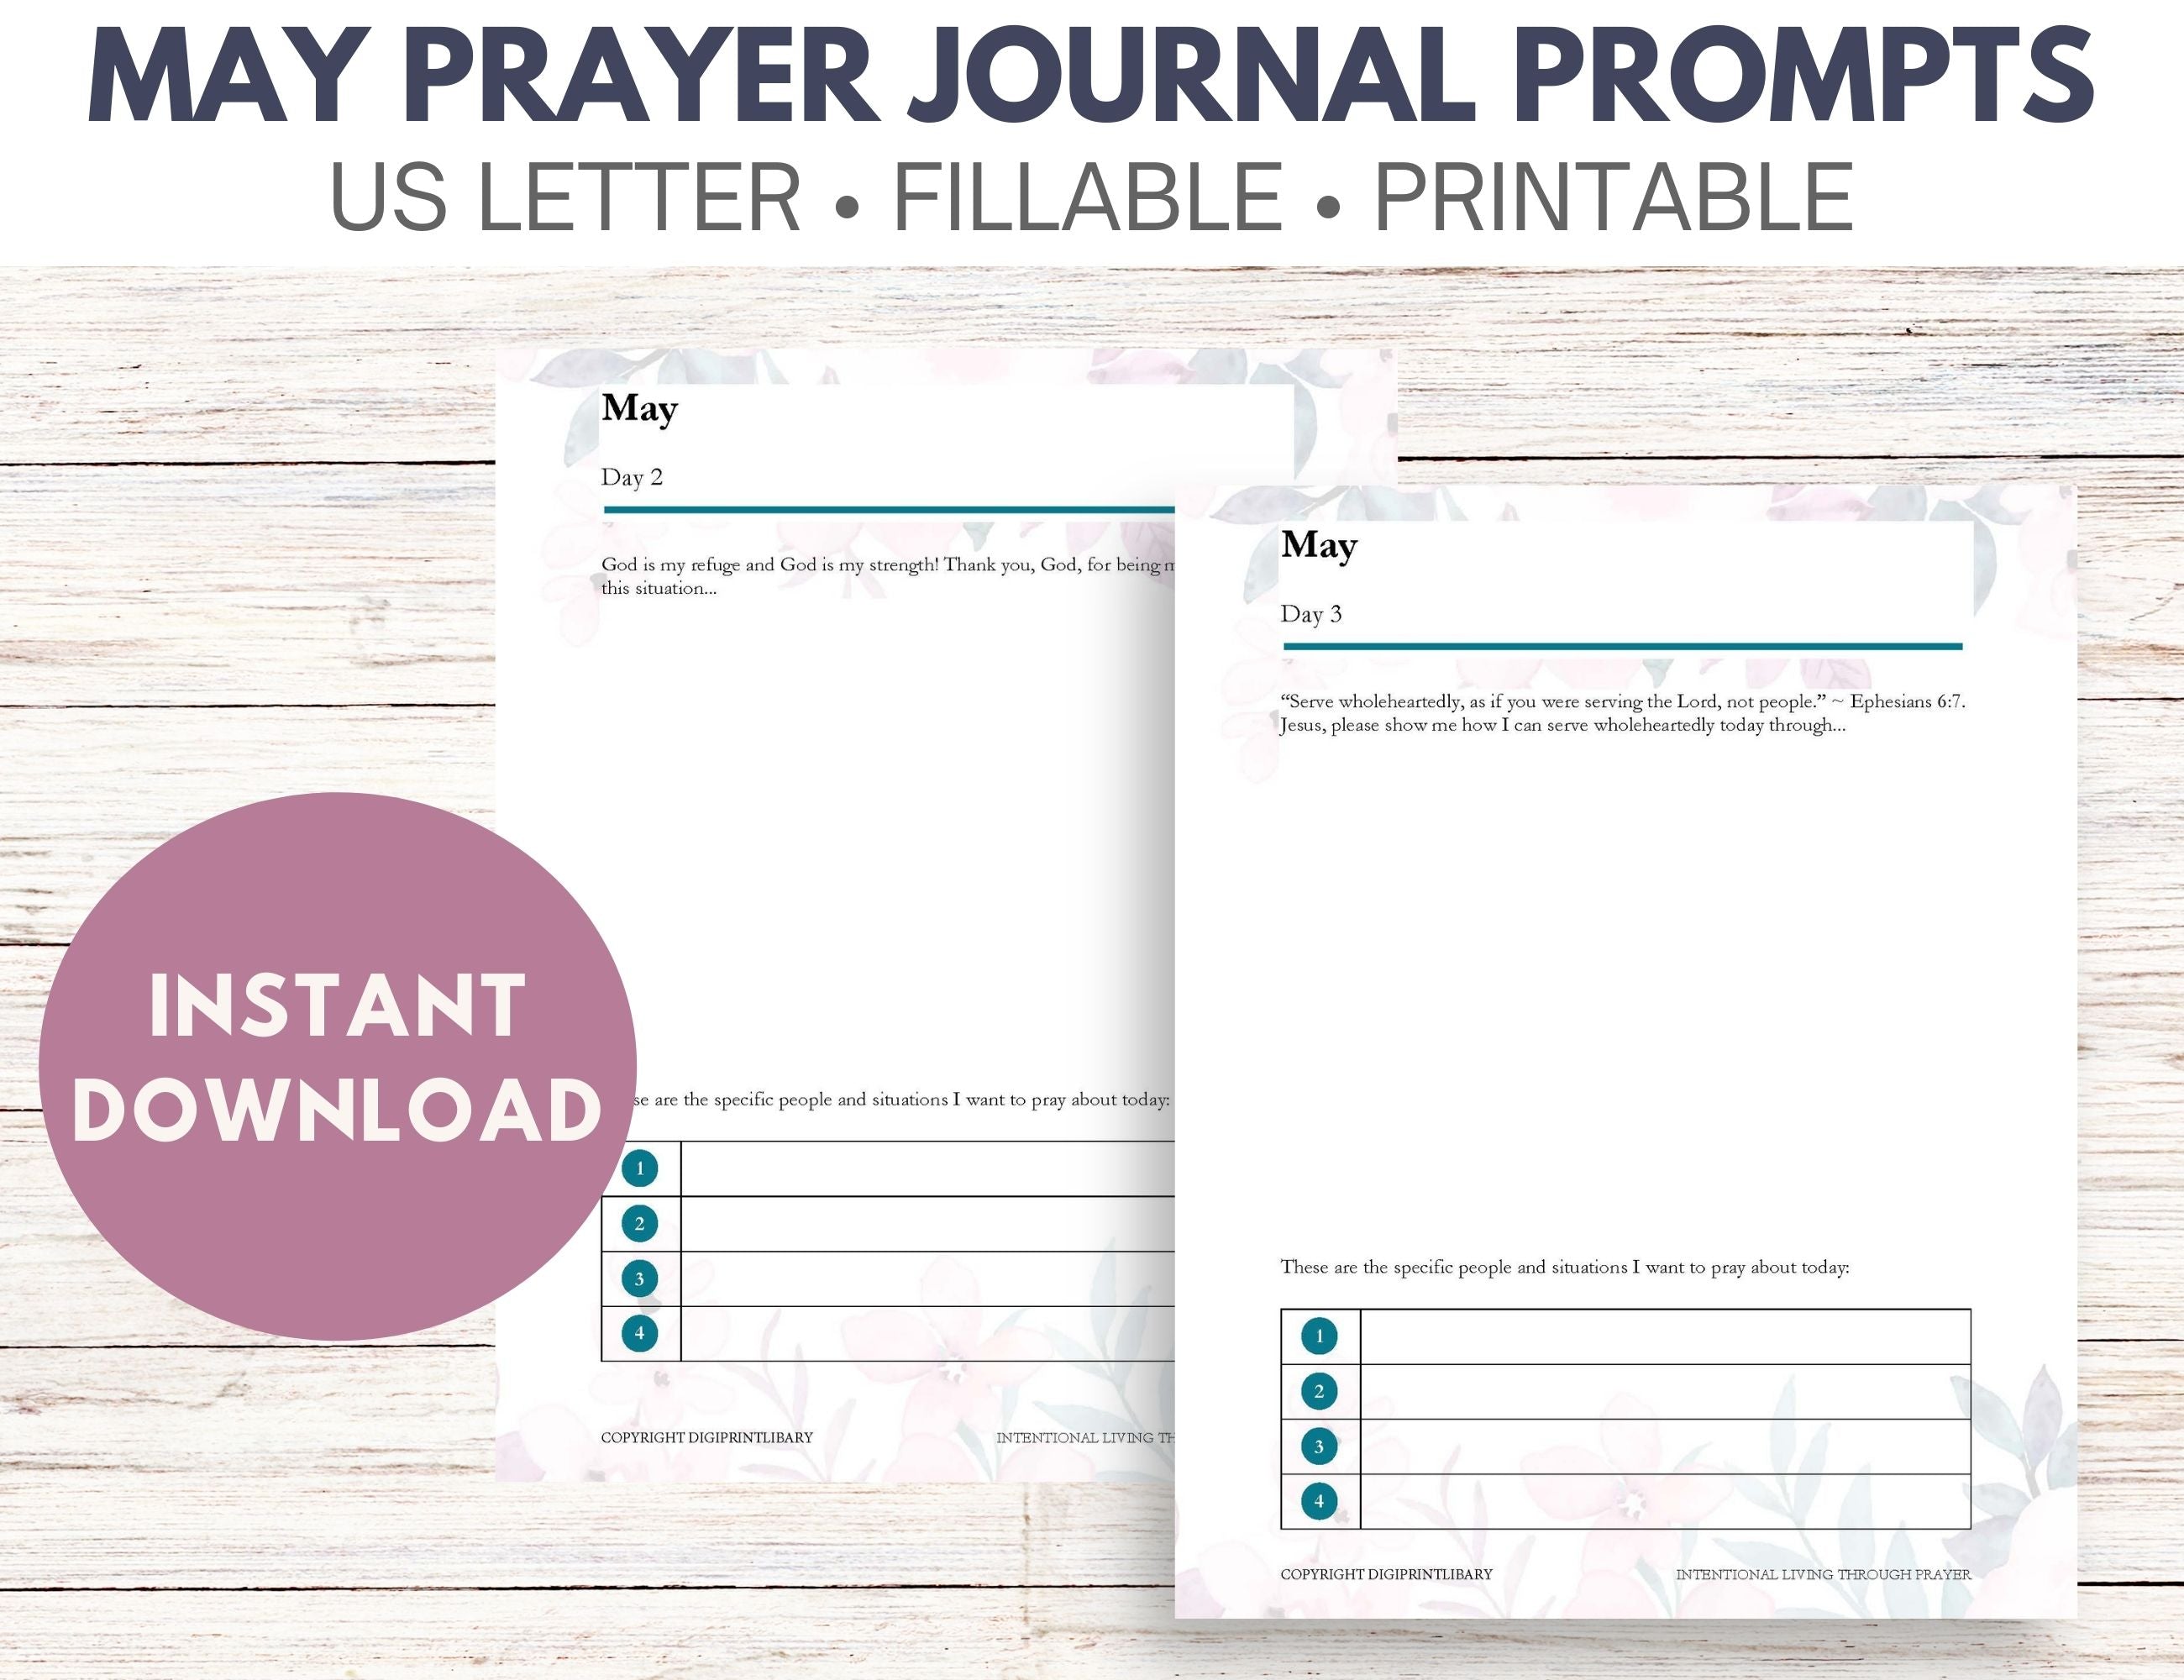 May Prayer Journal Prompts (Fillable)